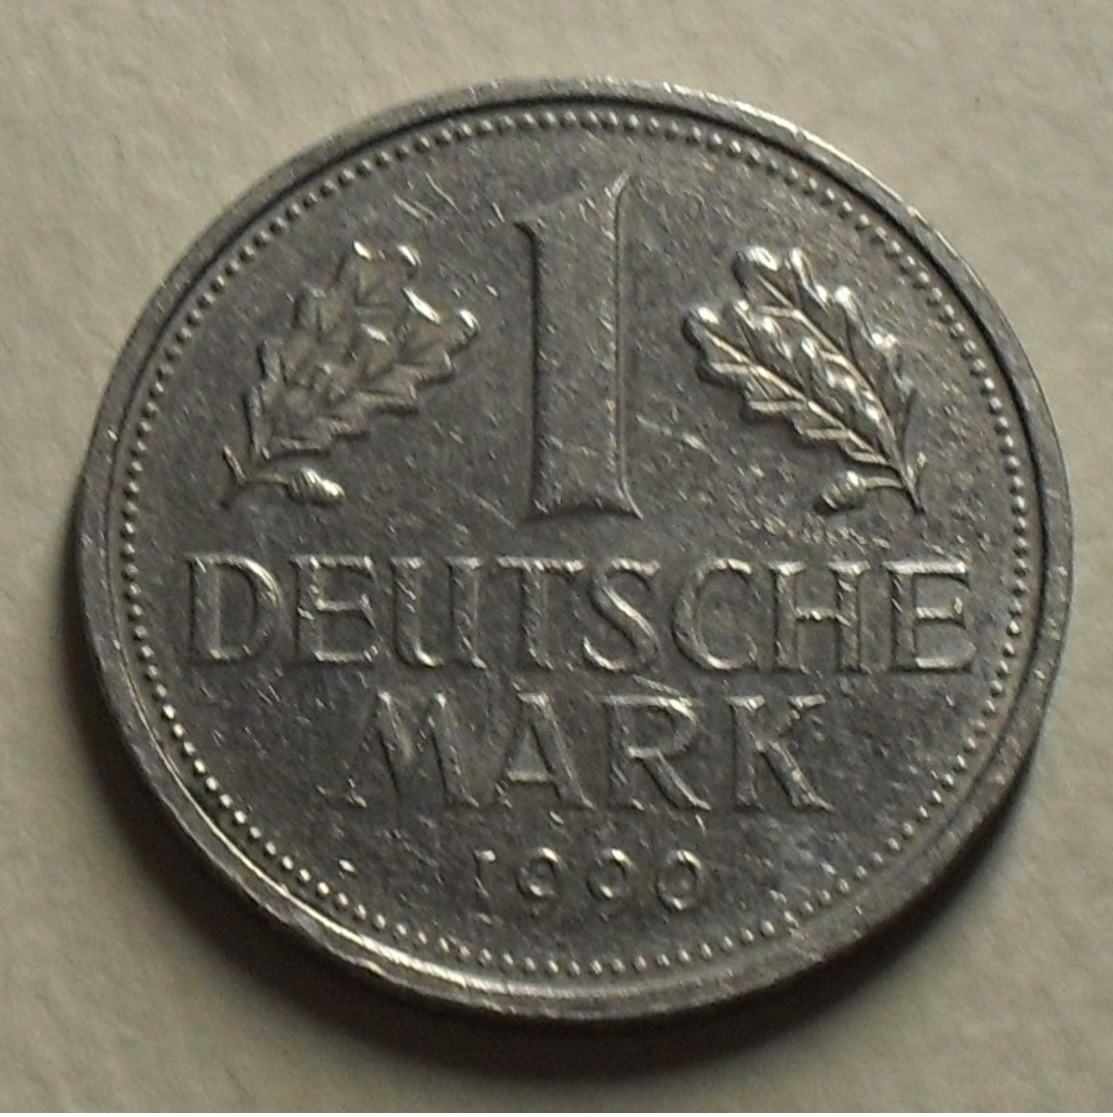 1990 - Allemagne - Germany - 1 MARK (A) KM 110 - 1 Mark